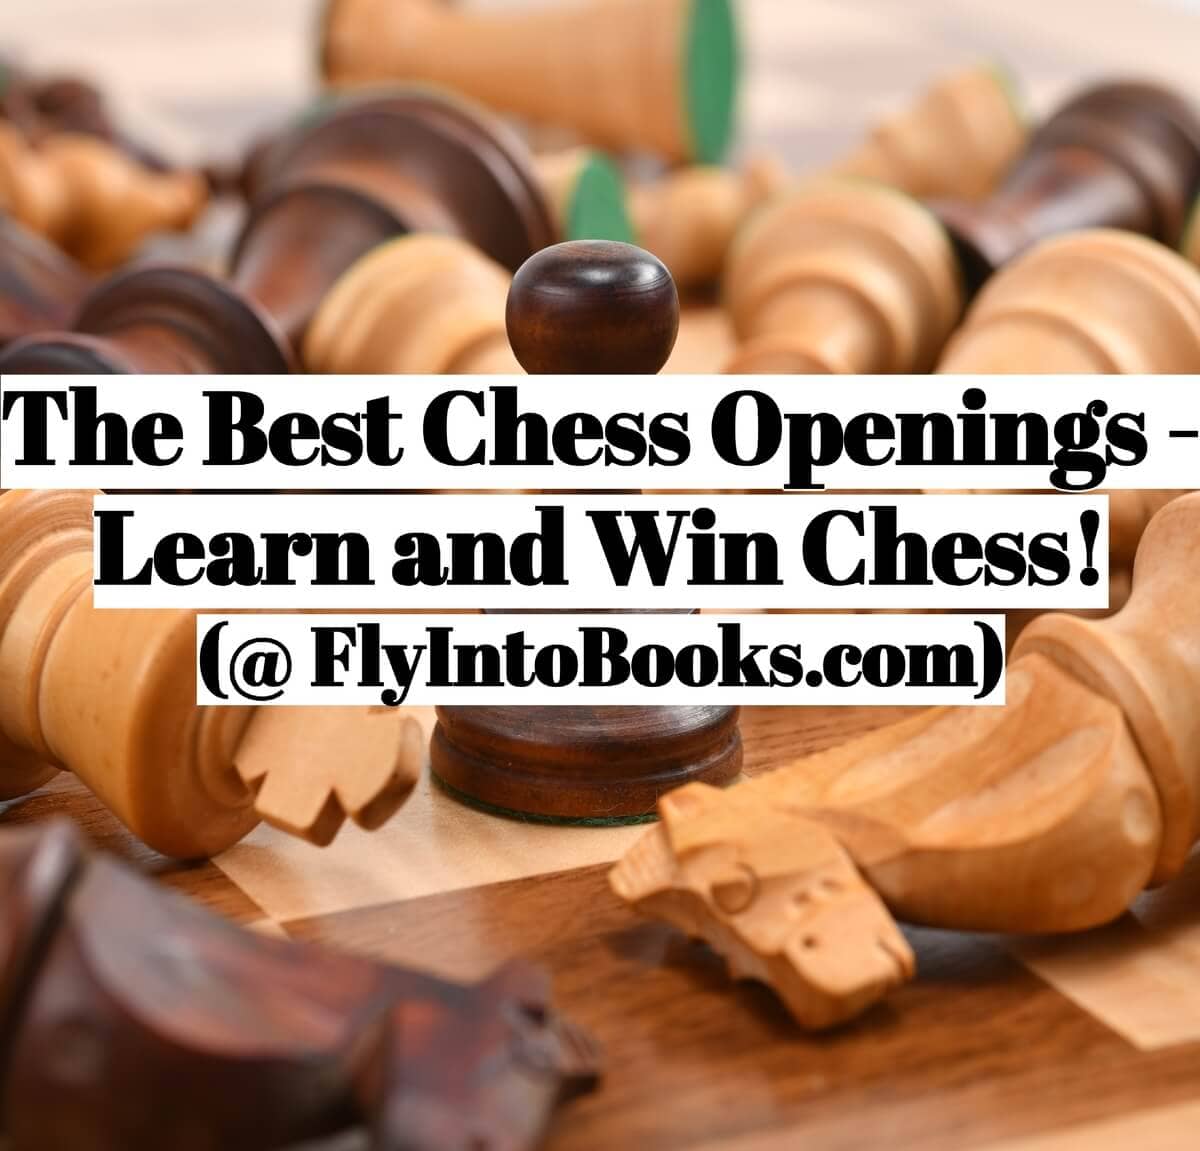 What are the Best Chess Openings to Improve Your Chess Game? Chess